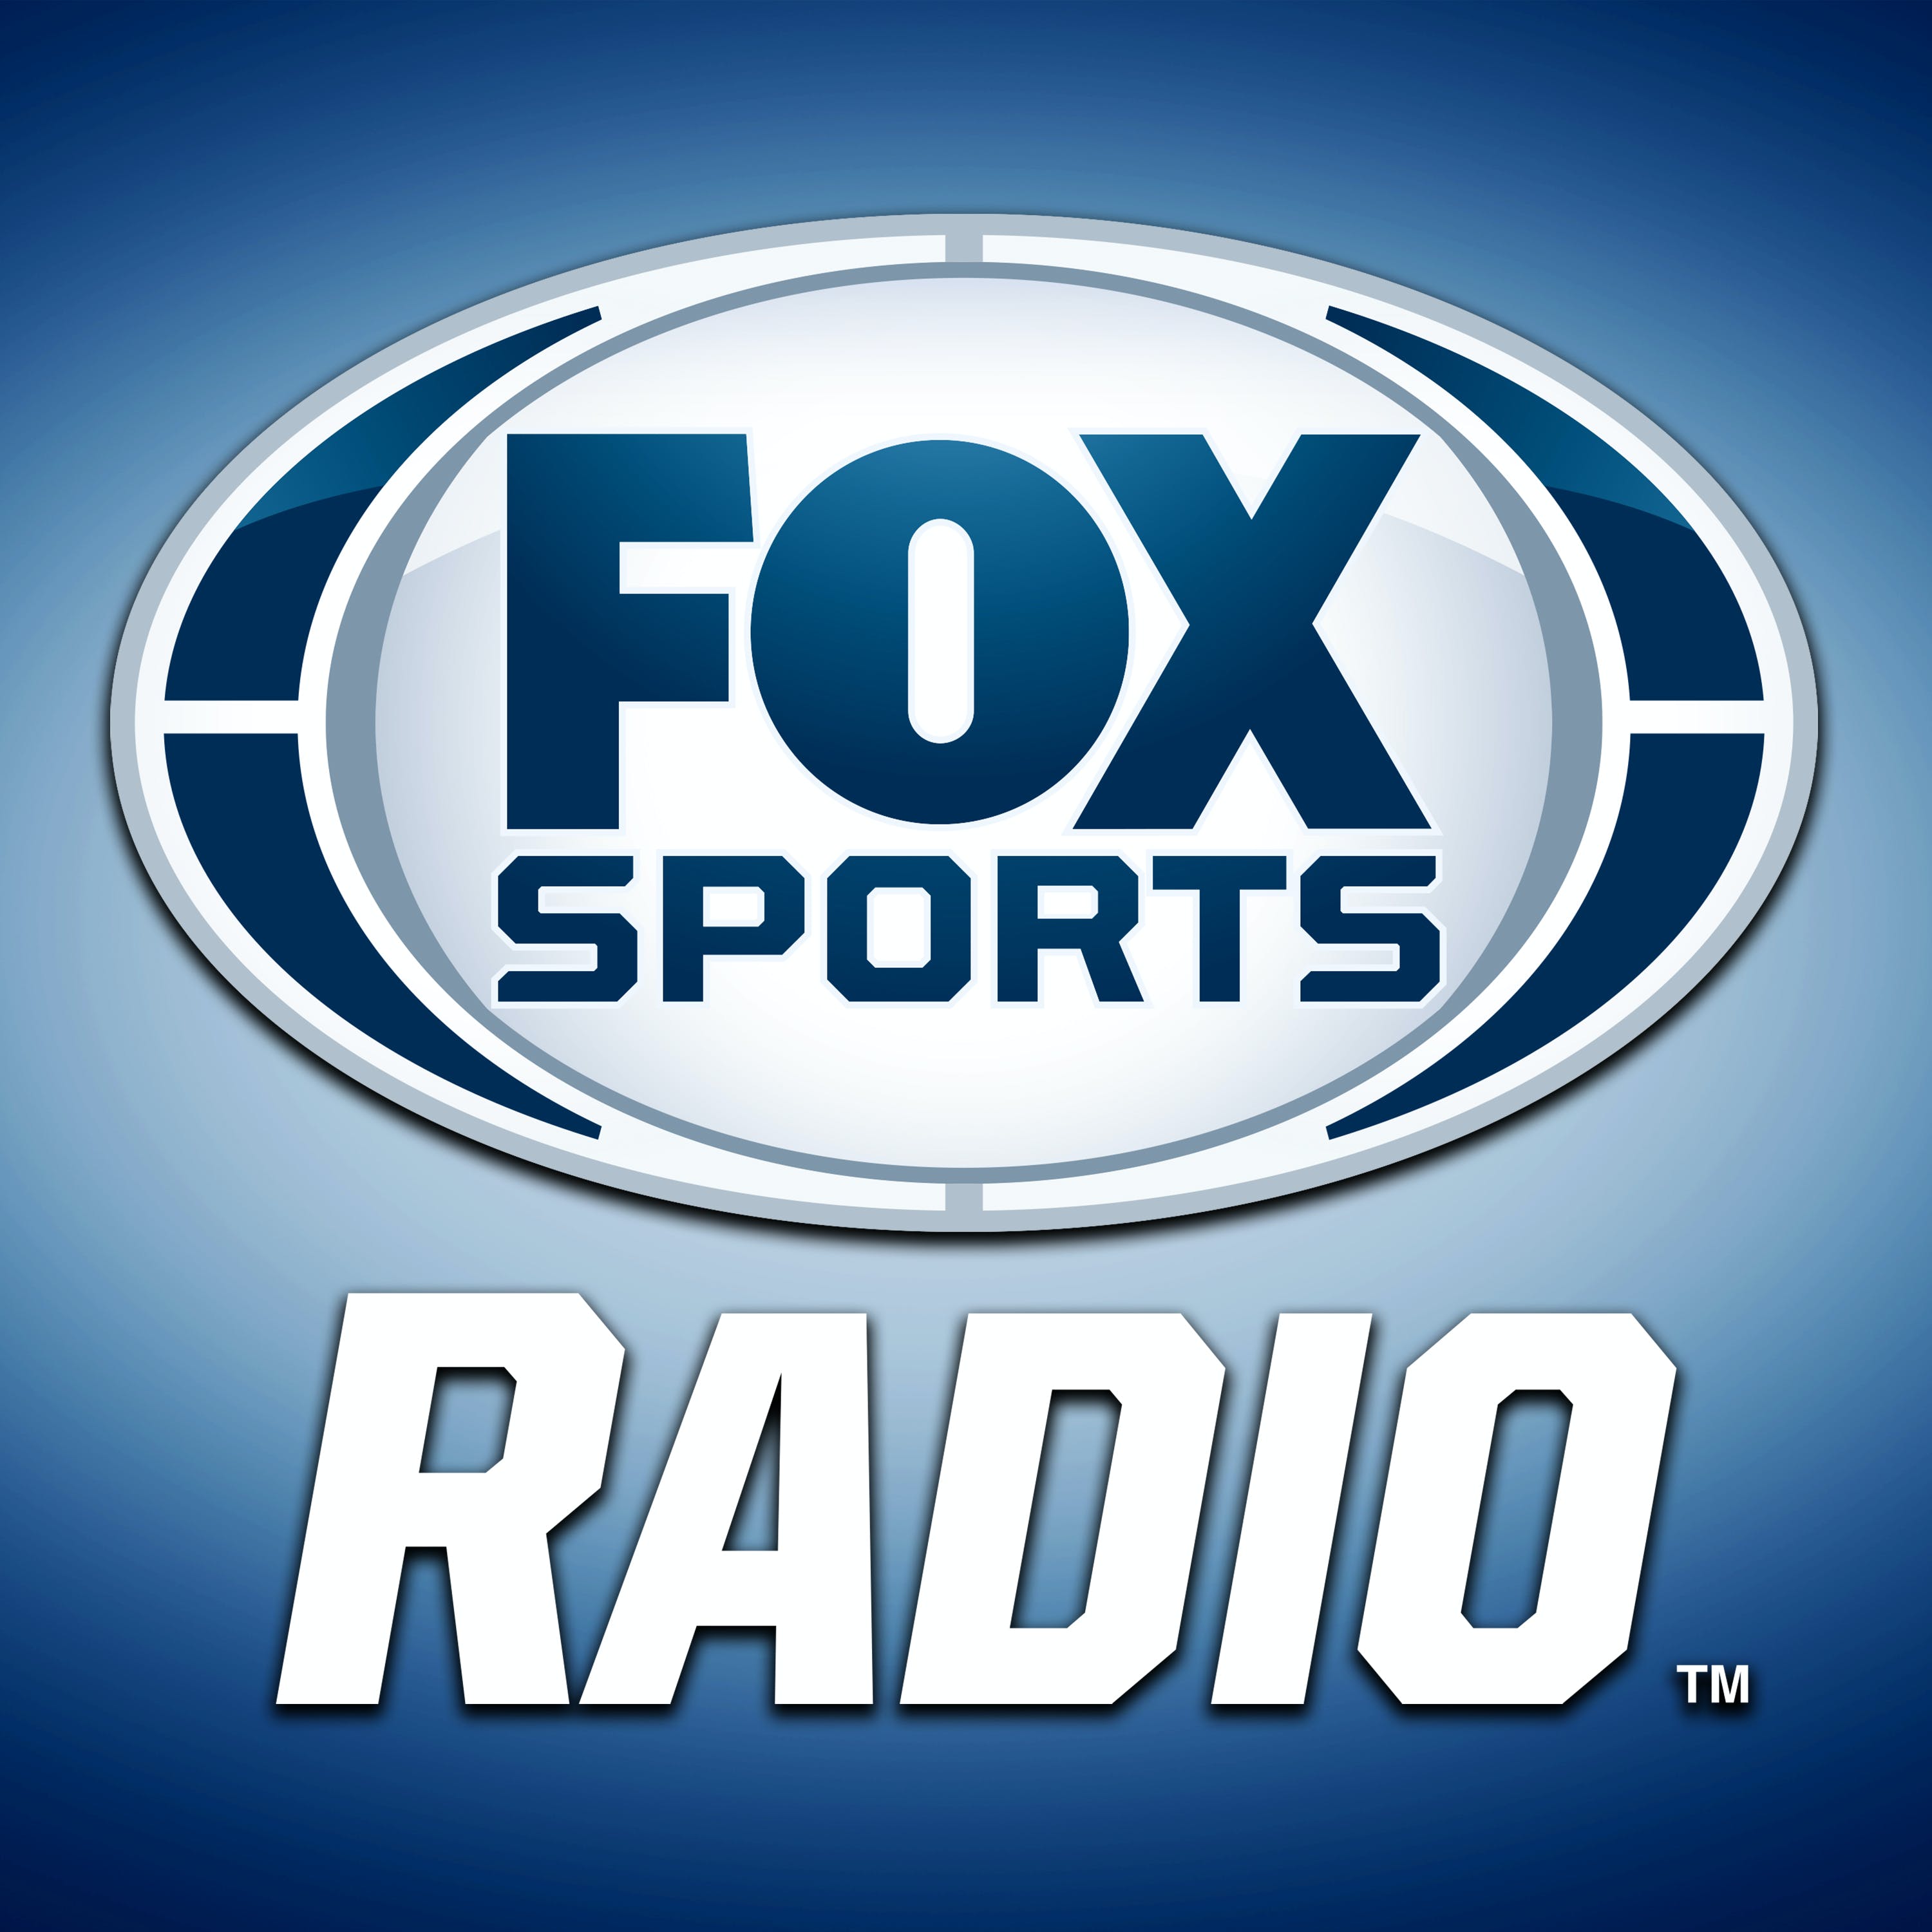 04/24/2021 - FOX Sports Saturday with Brian Noe and Ephraim Salaam - NFL Draft Preview